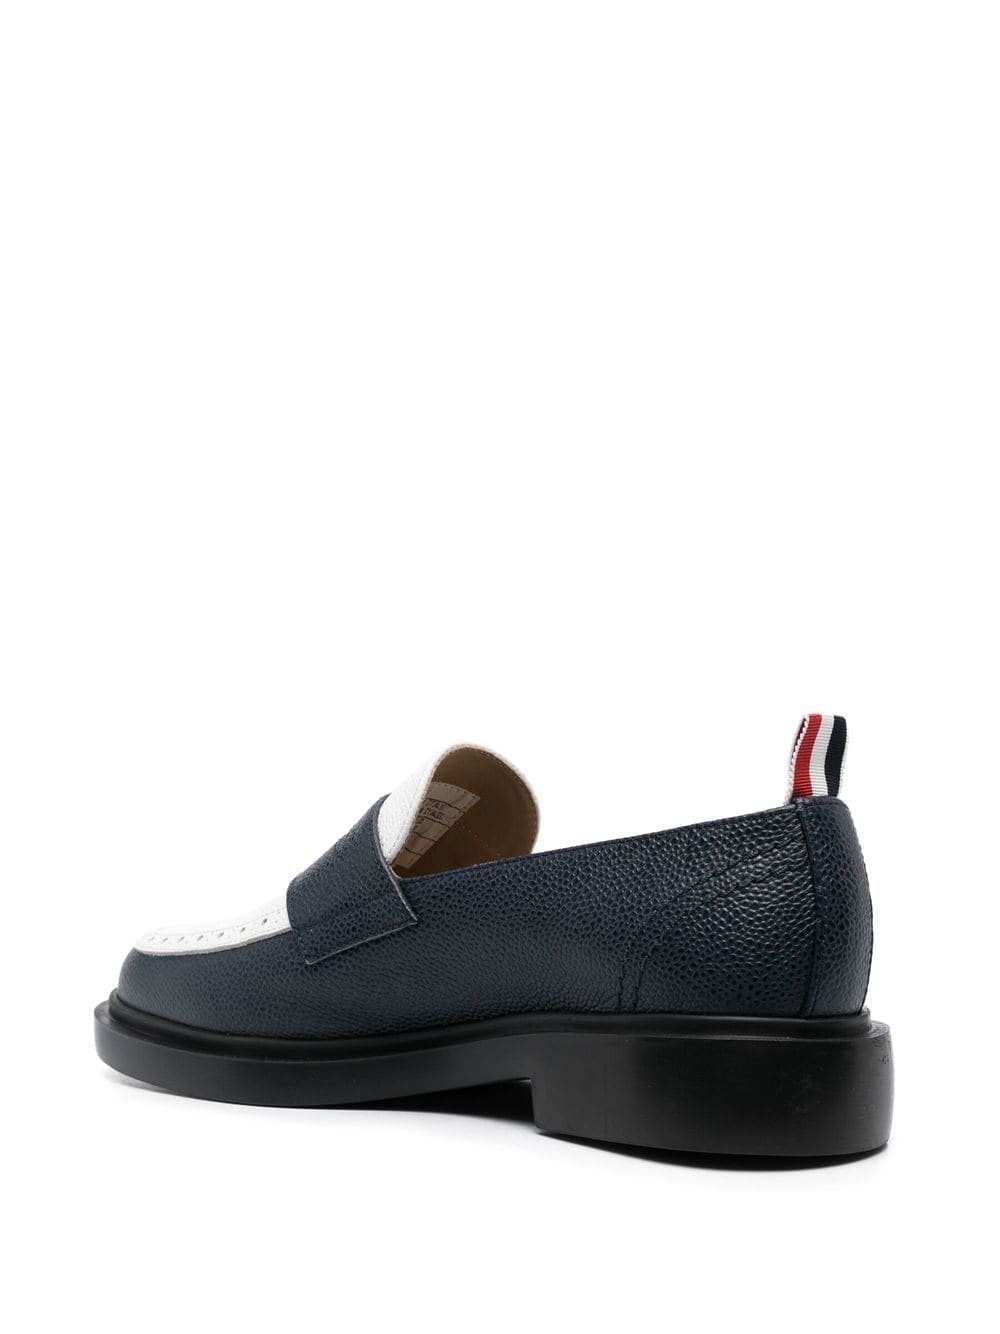 classic lightweight penny loafers - 3